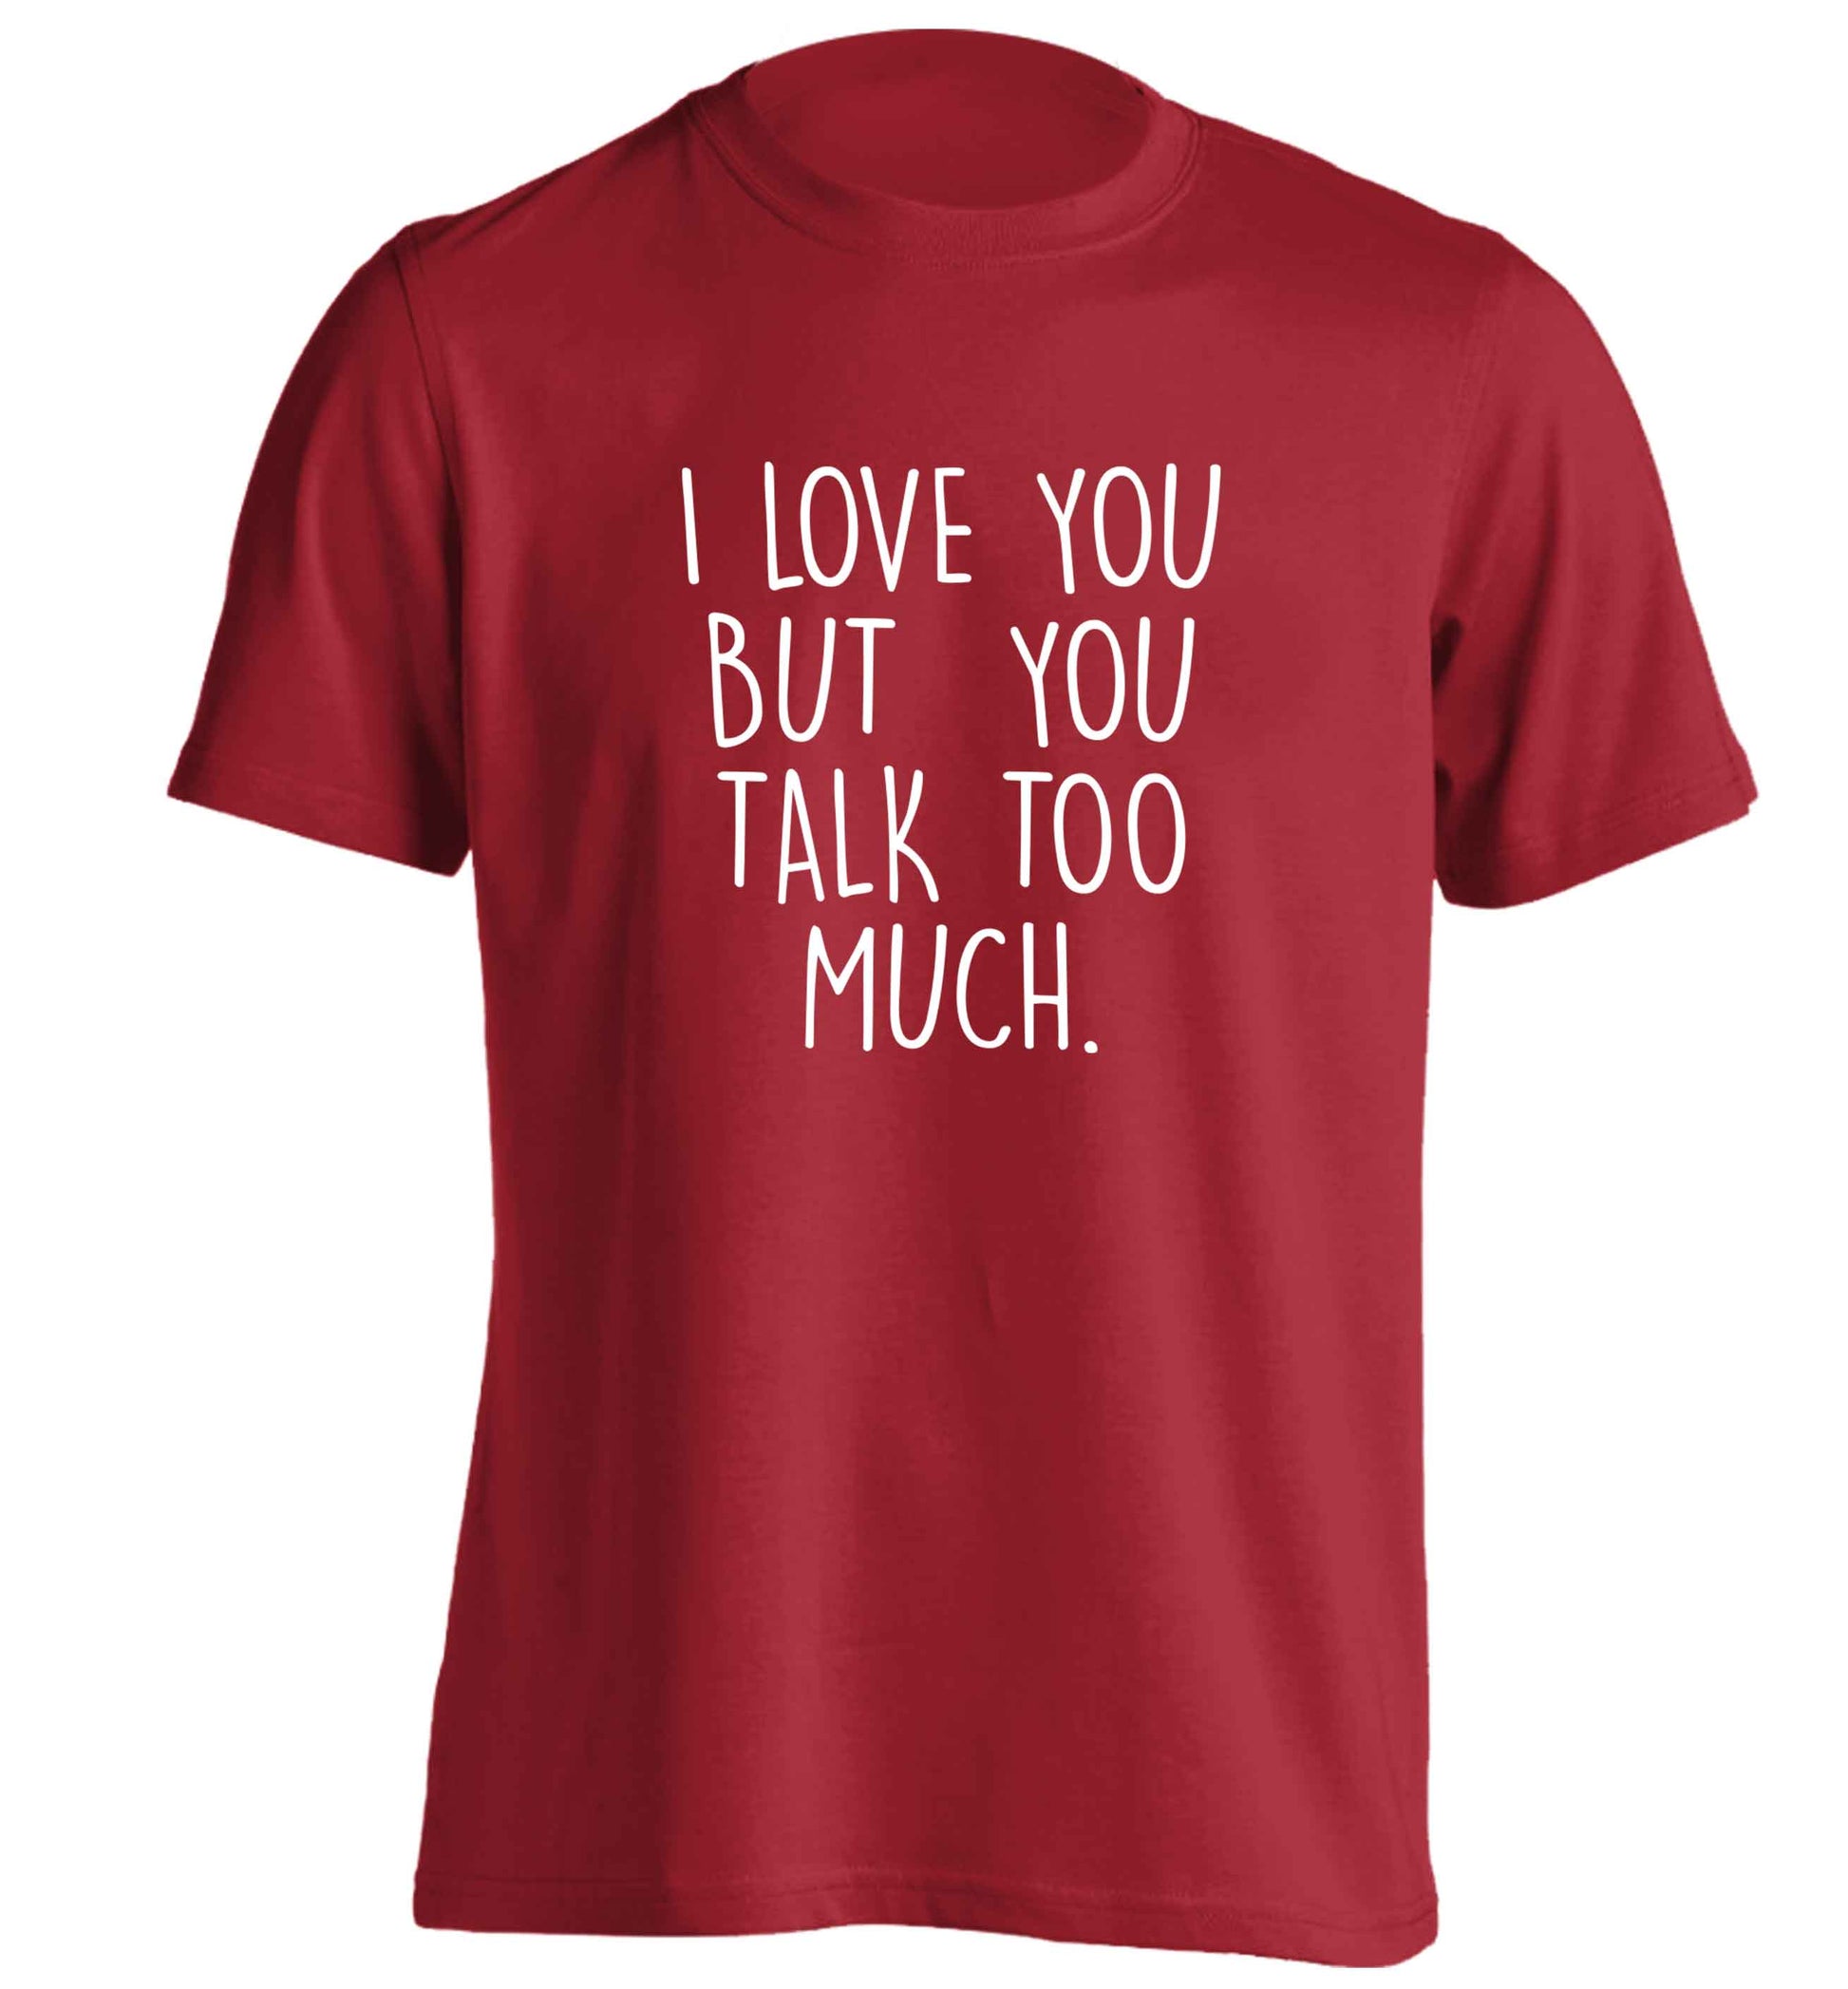 I love you but you talk too much adults unisex red Tshirt 2XL